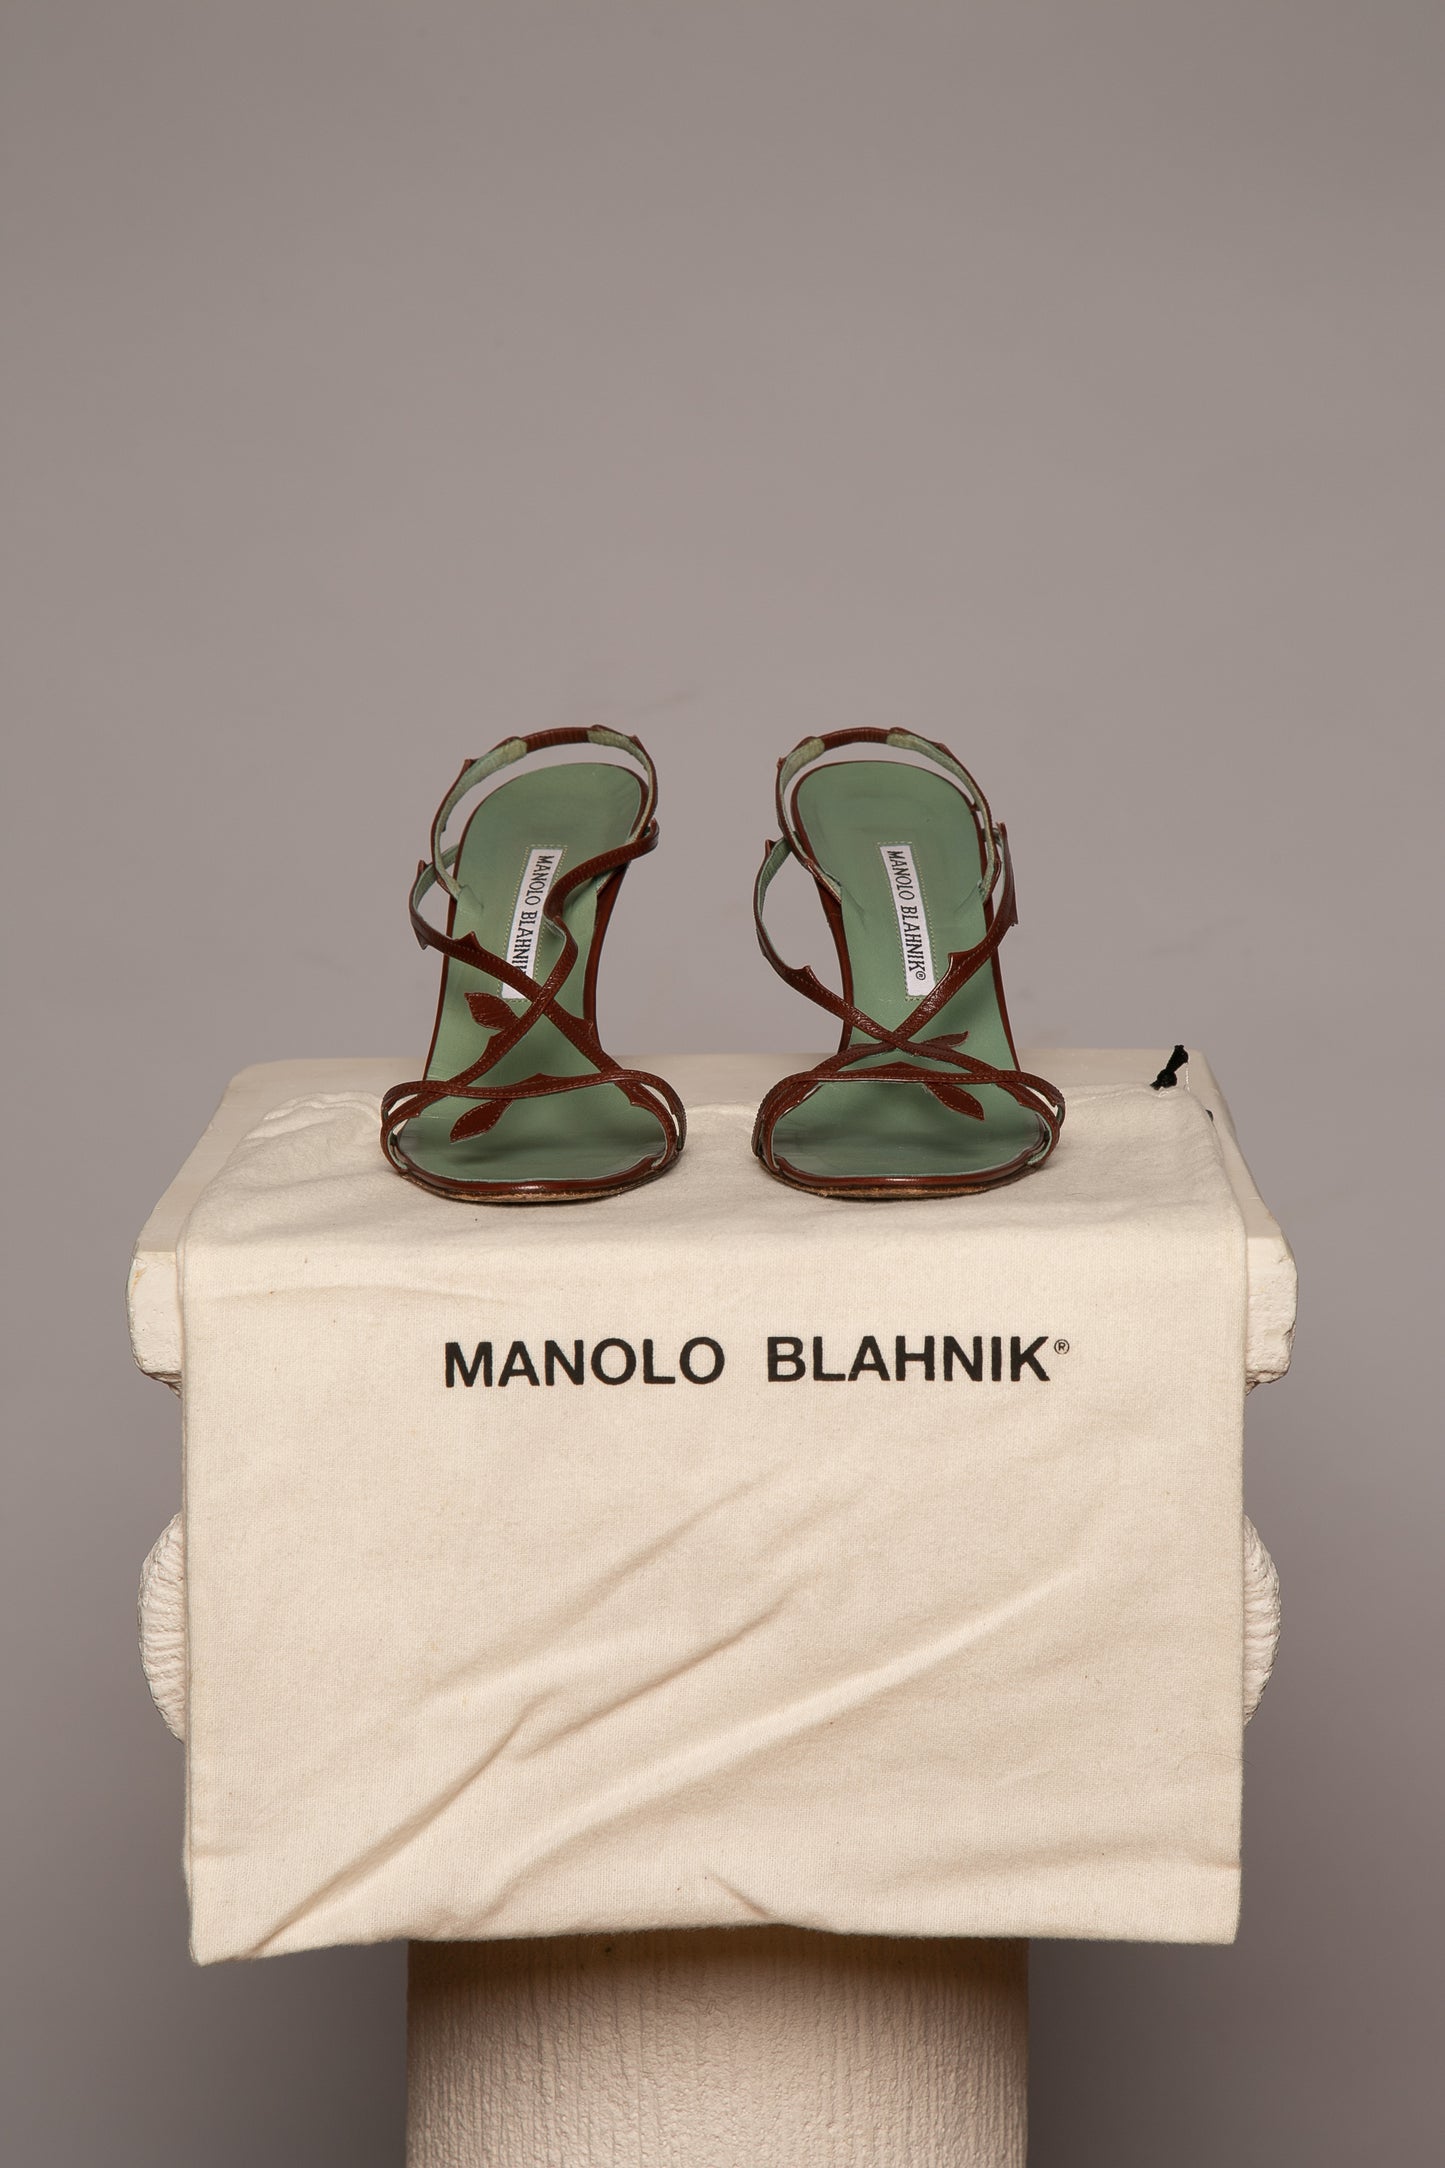 Extremely Rare MANOLO BLAHNIK Sandals